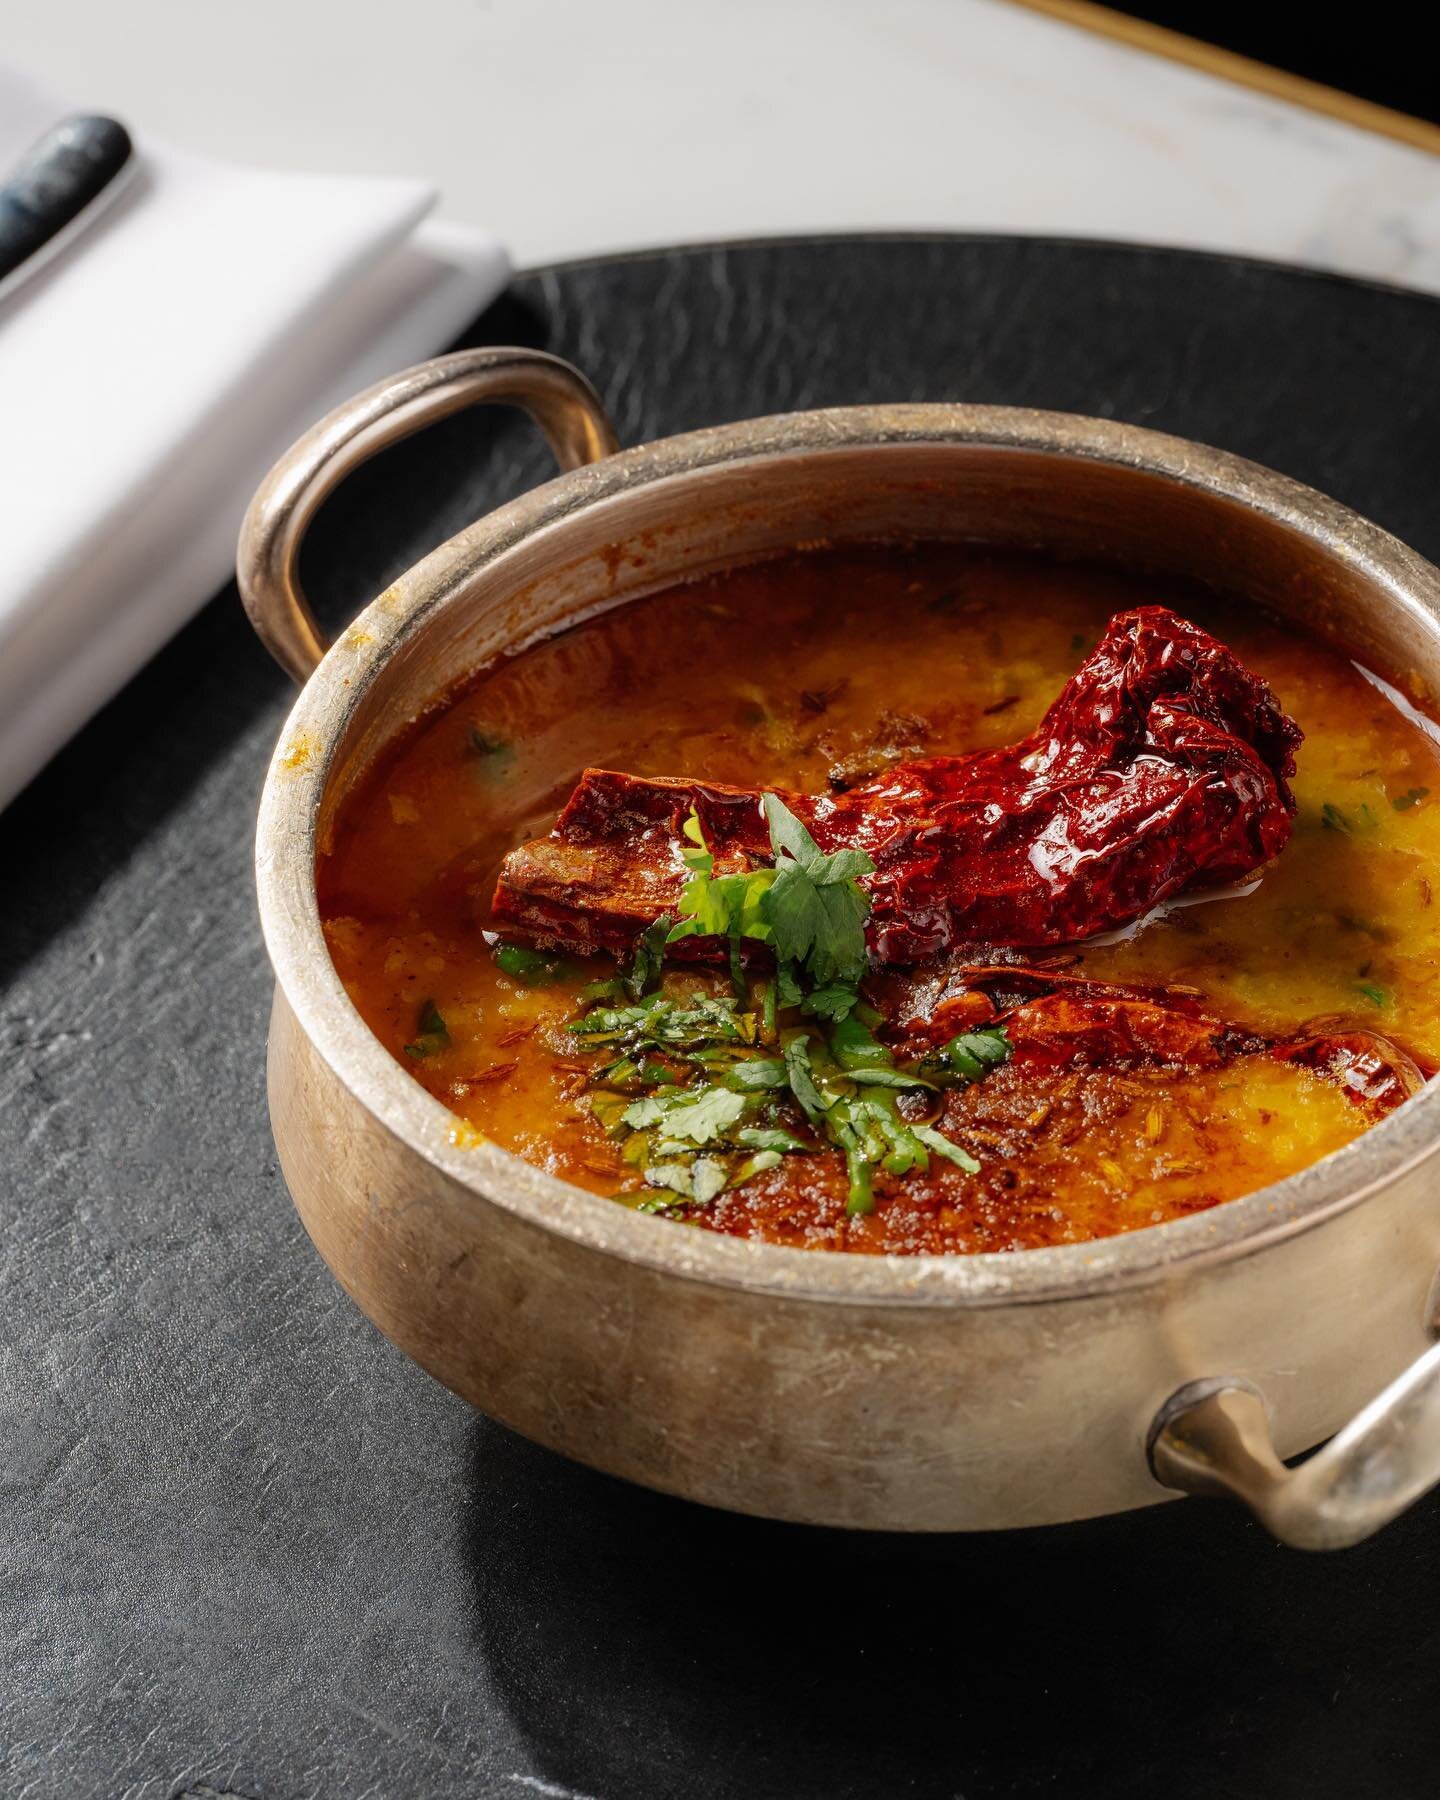 Have you tried our Dal tadka,Spiced yellow lentils ,tempered with cumin seeds and dry red chilli? @chefvineet @harrodsfood